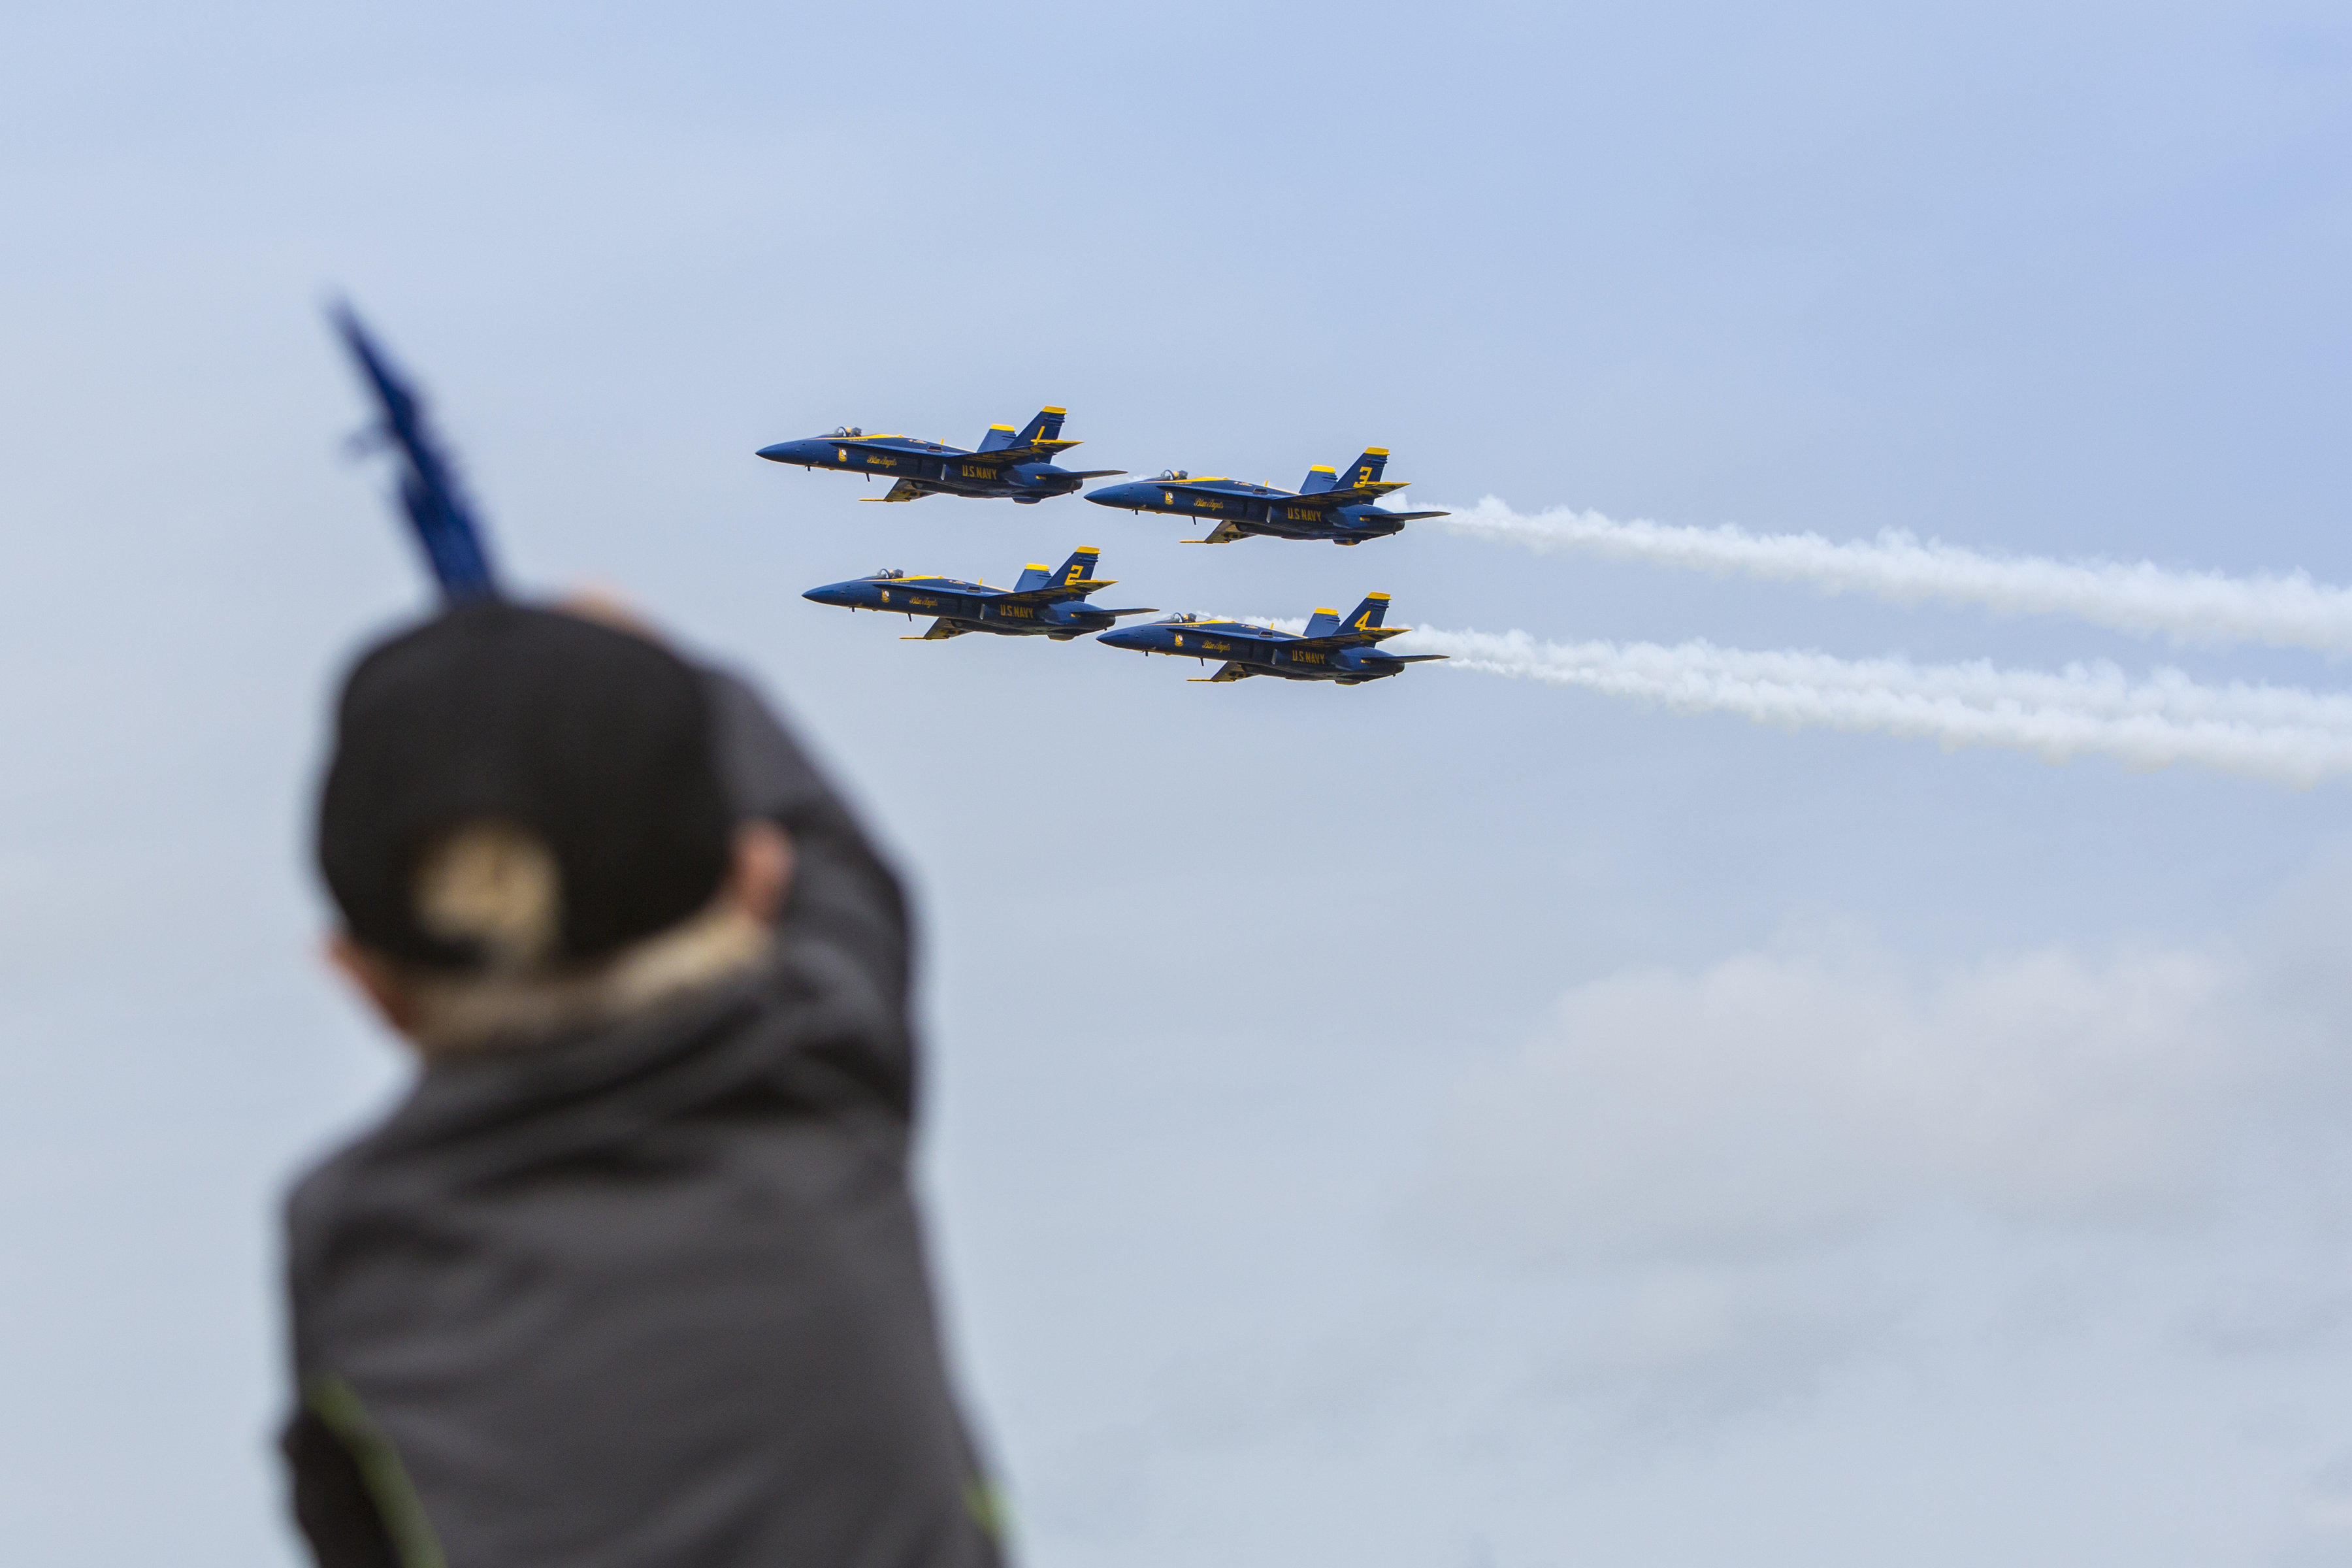 May 4th - 6th: MCAS Cherry Point Air Show – Visit New Bern